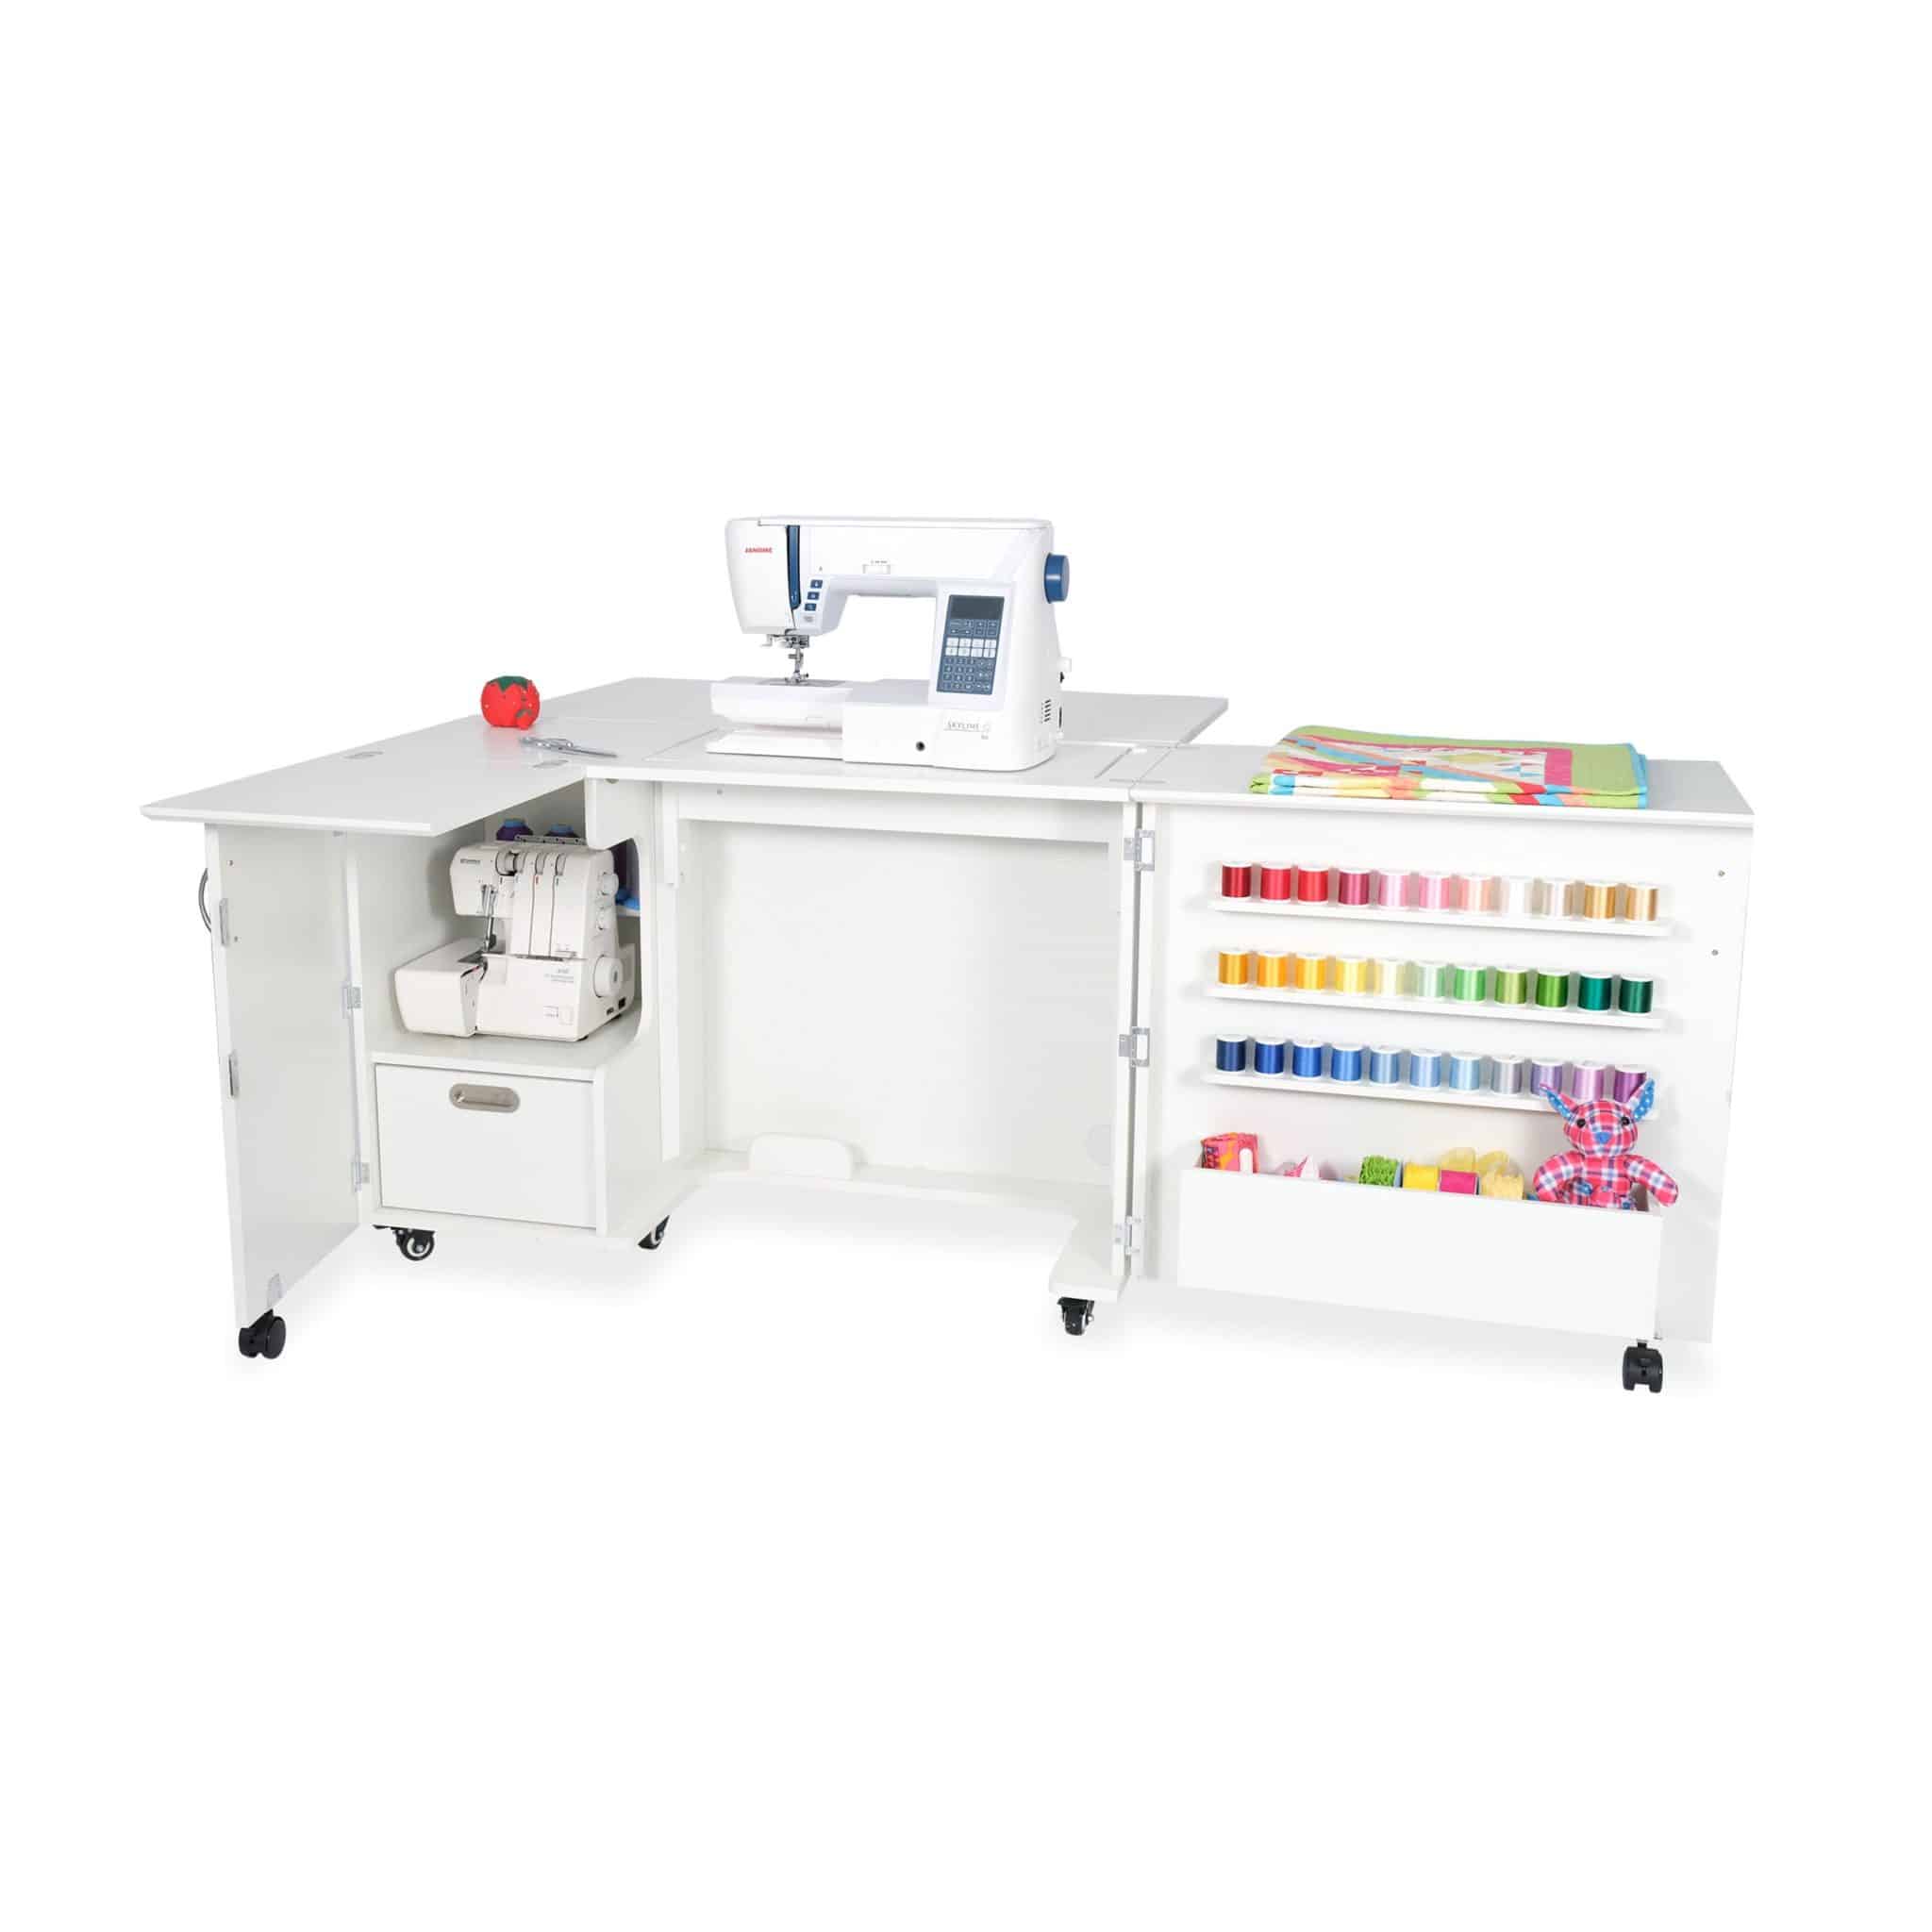 Wallaby Sewing Cabinet - Arrow Sewing Cabinets